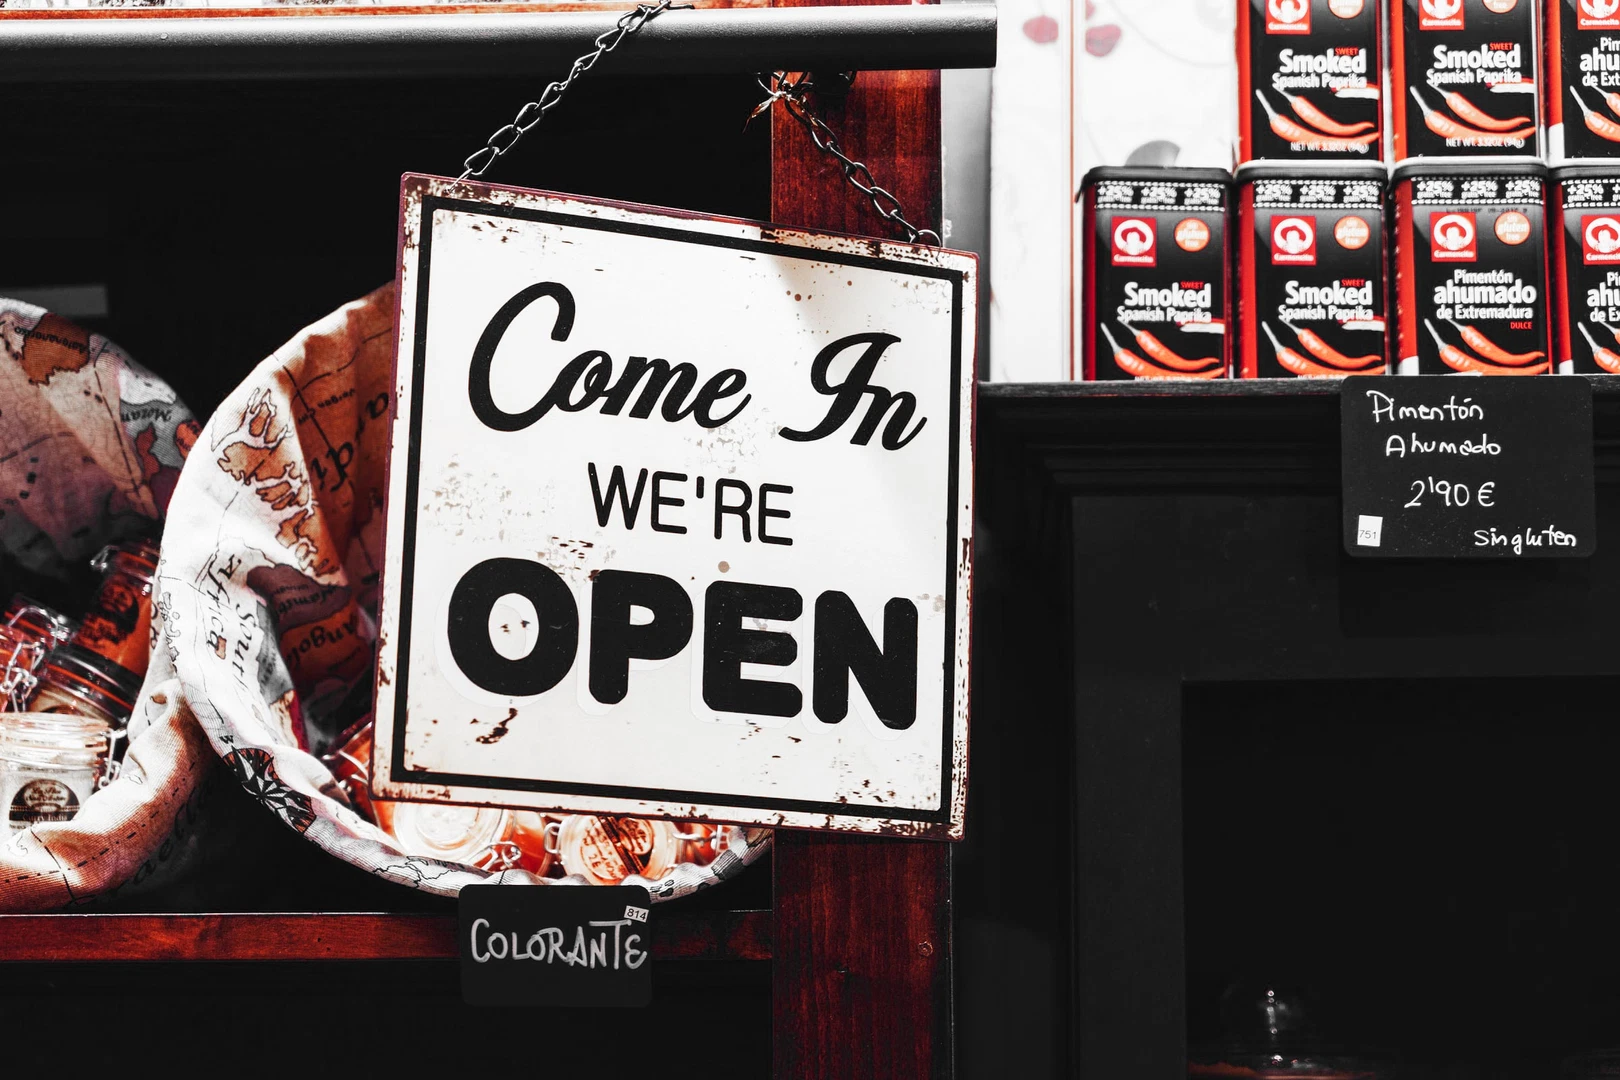 A sign outside a shop window that reads "Come in, We're open!"